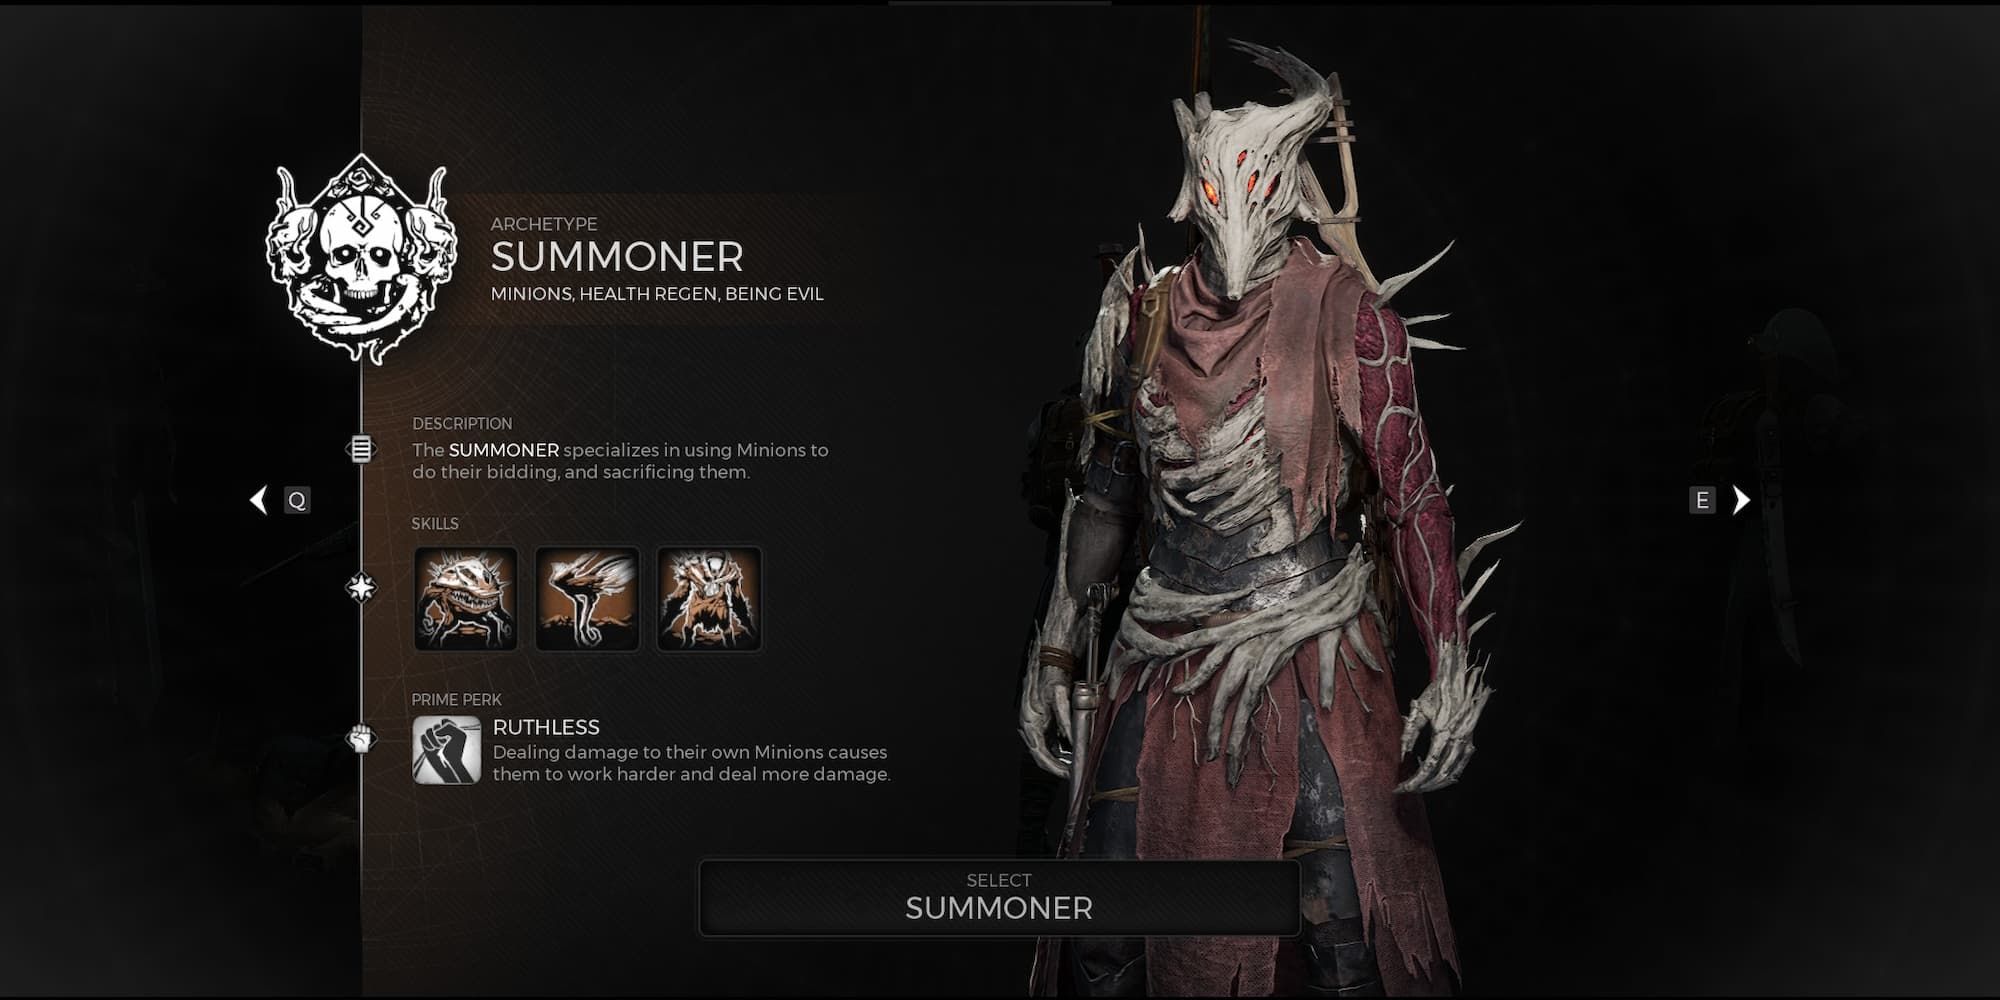 The Summoner class in Remnant 2's character creator